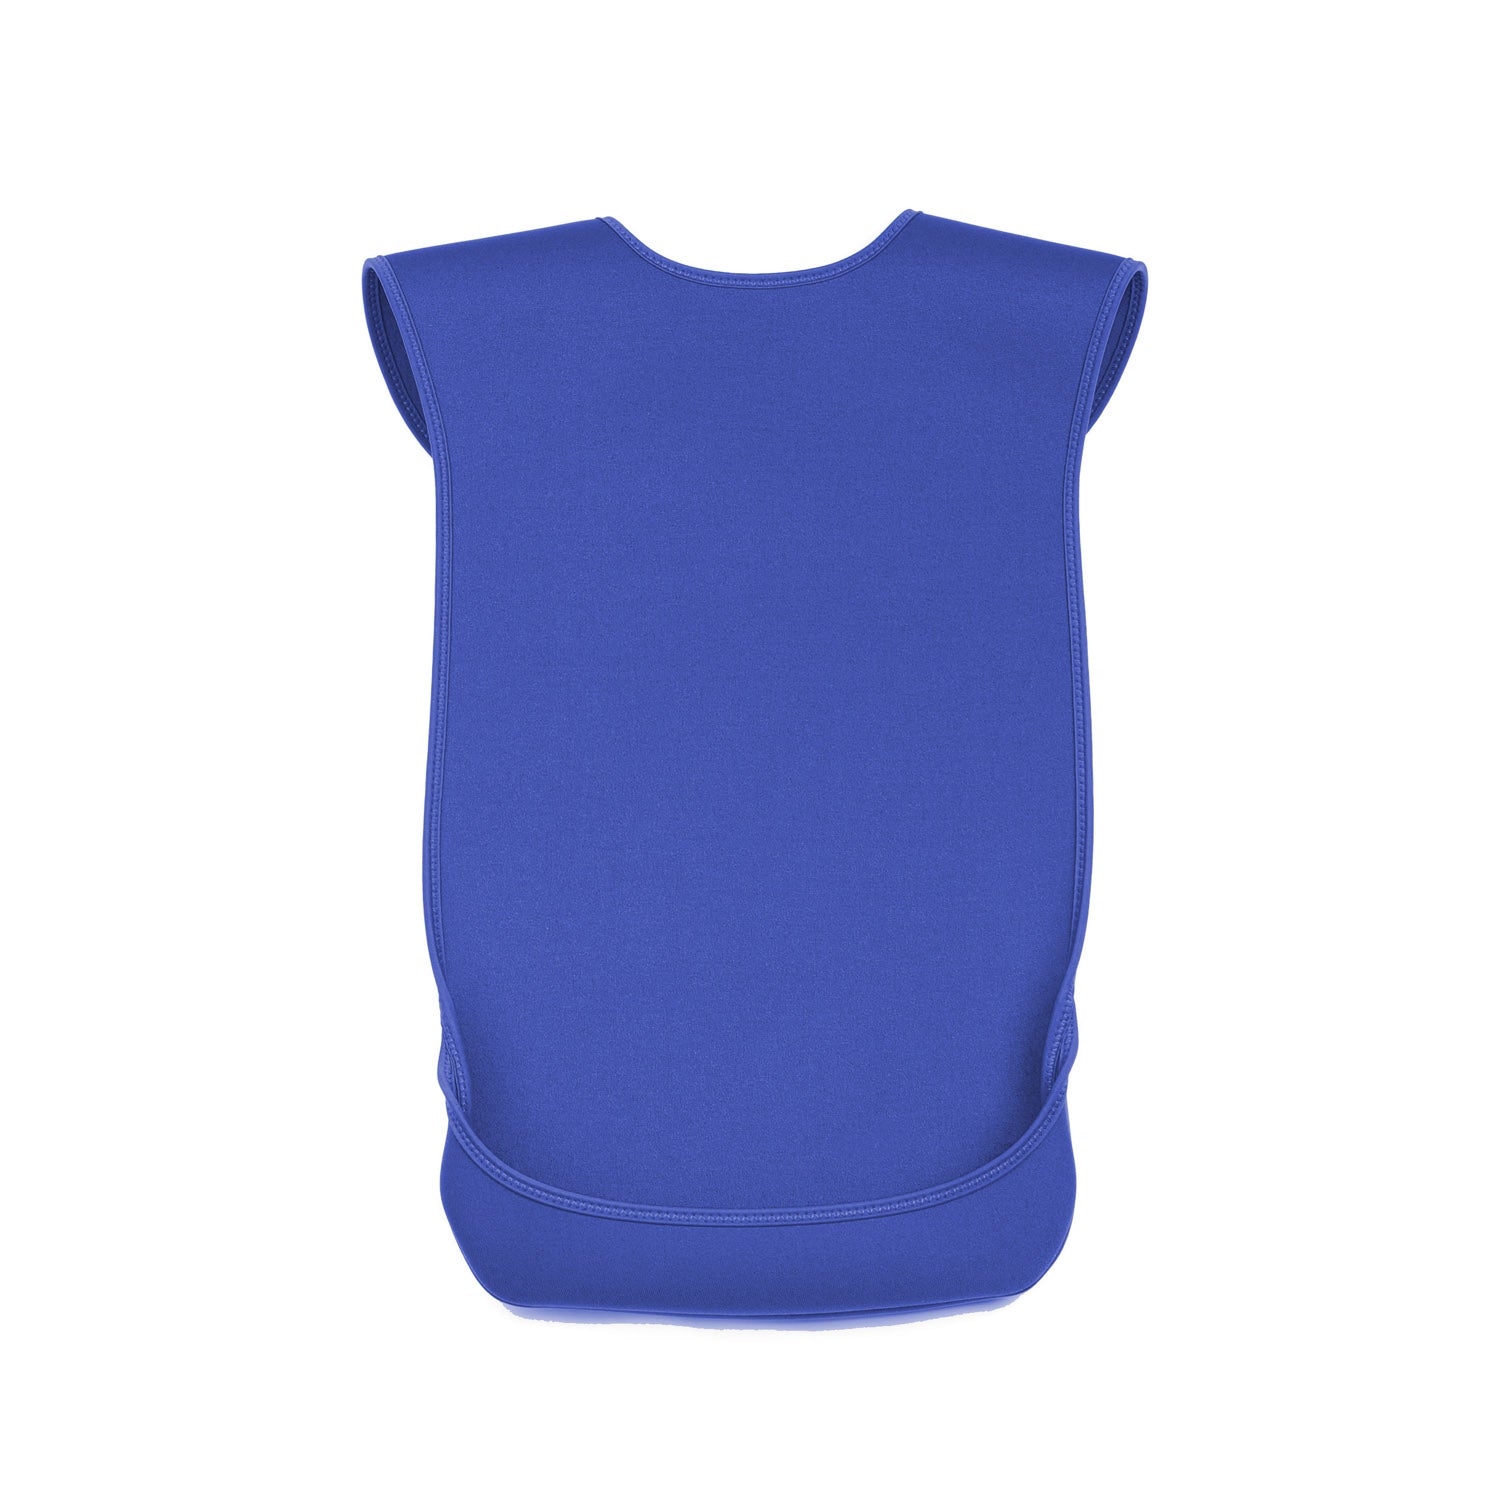 CareDesign_small_tabard_for_special_needs_toddlers_kids_adults_blue_bib_with_feeding_catching_pouch